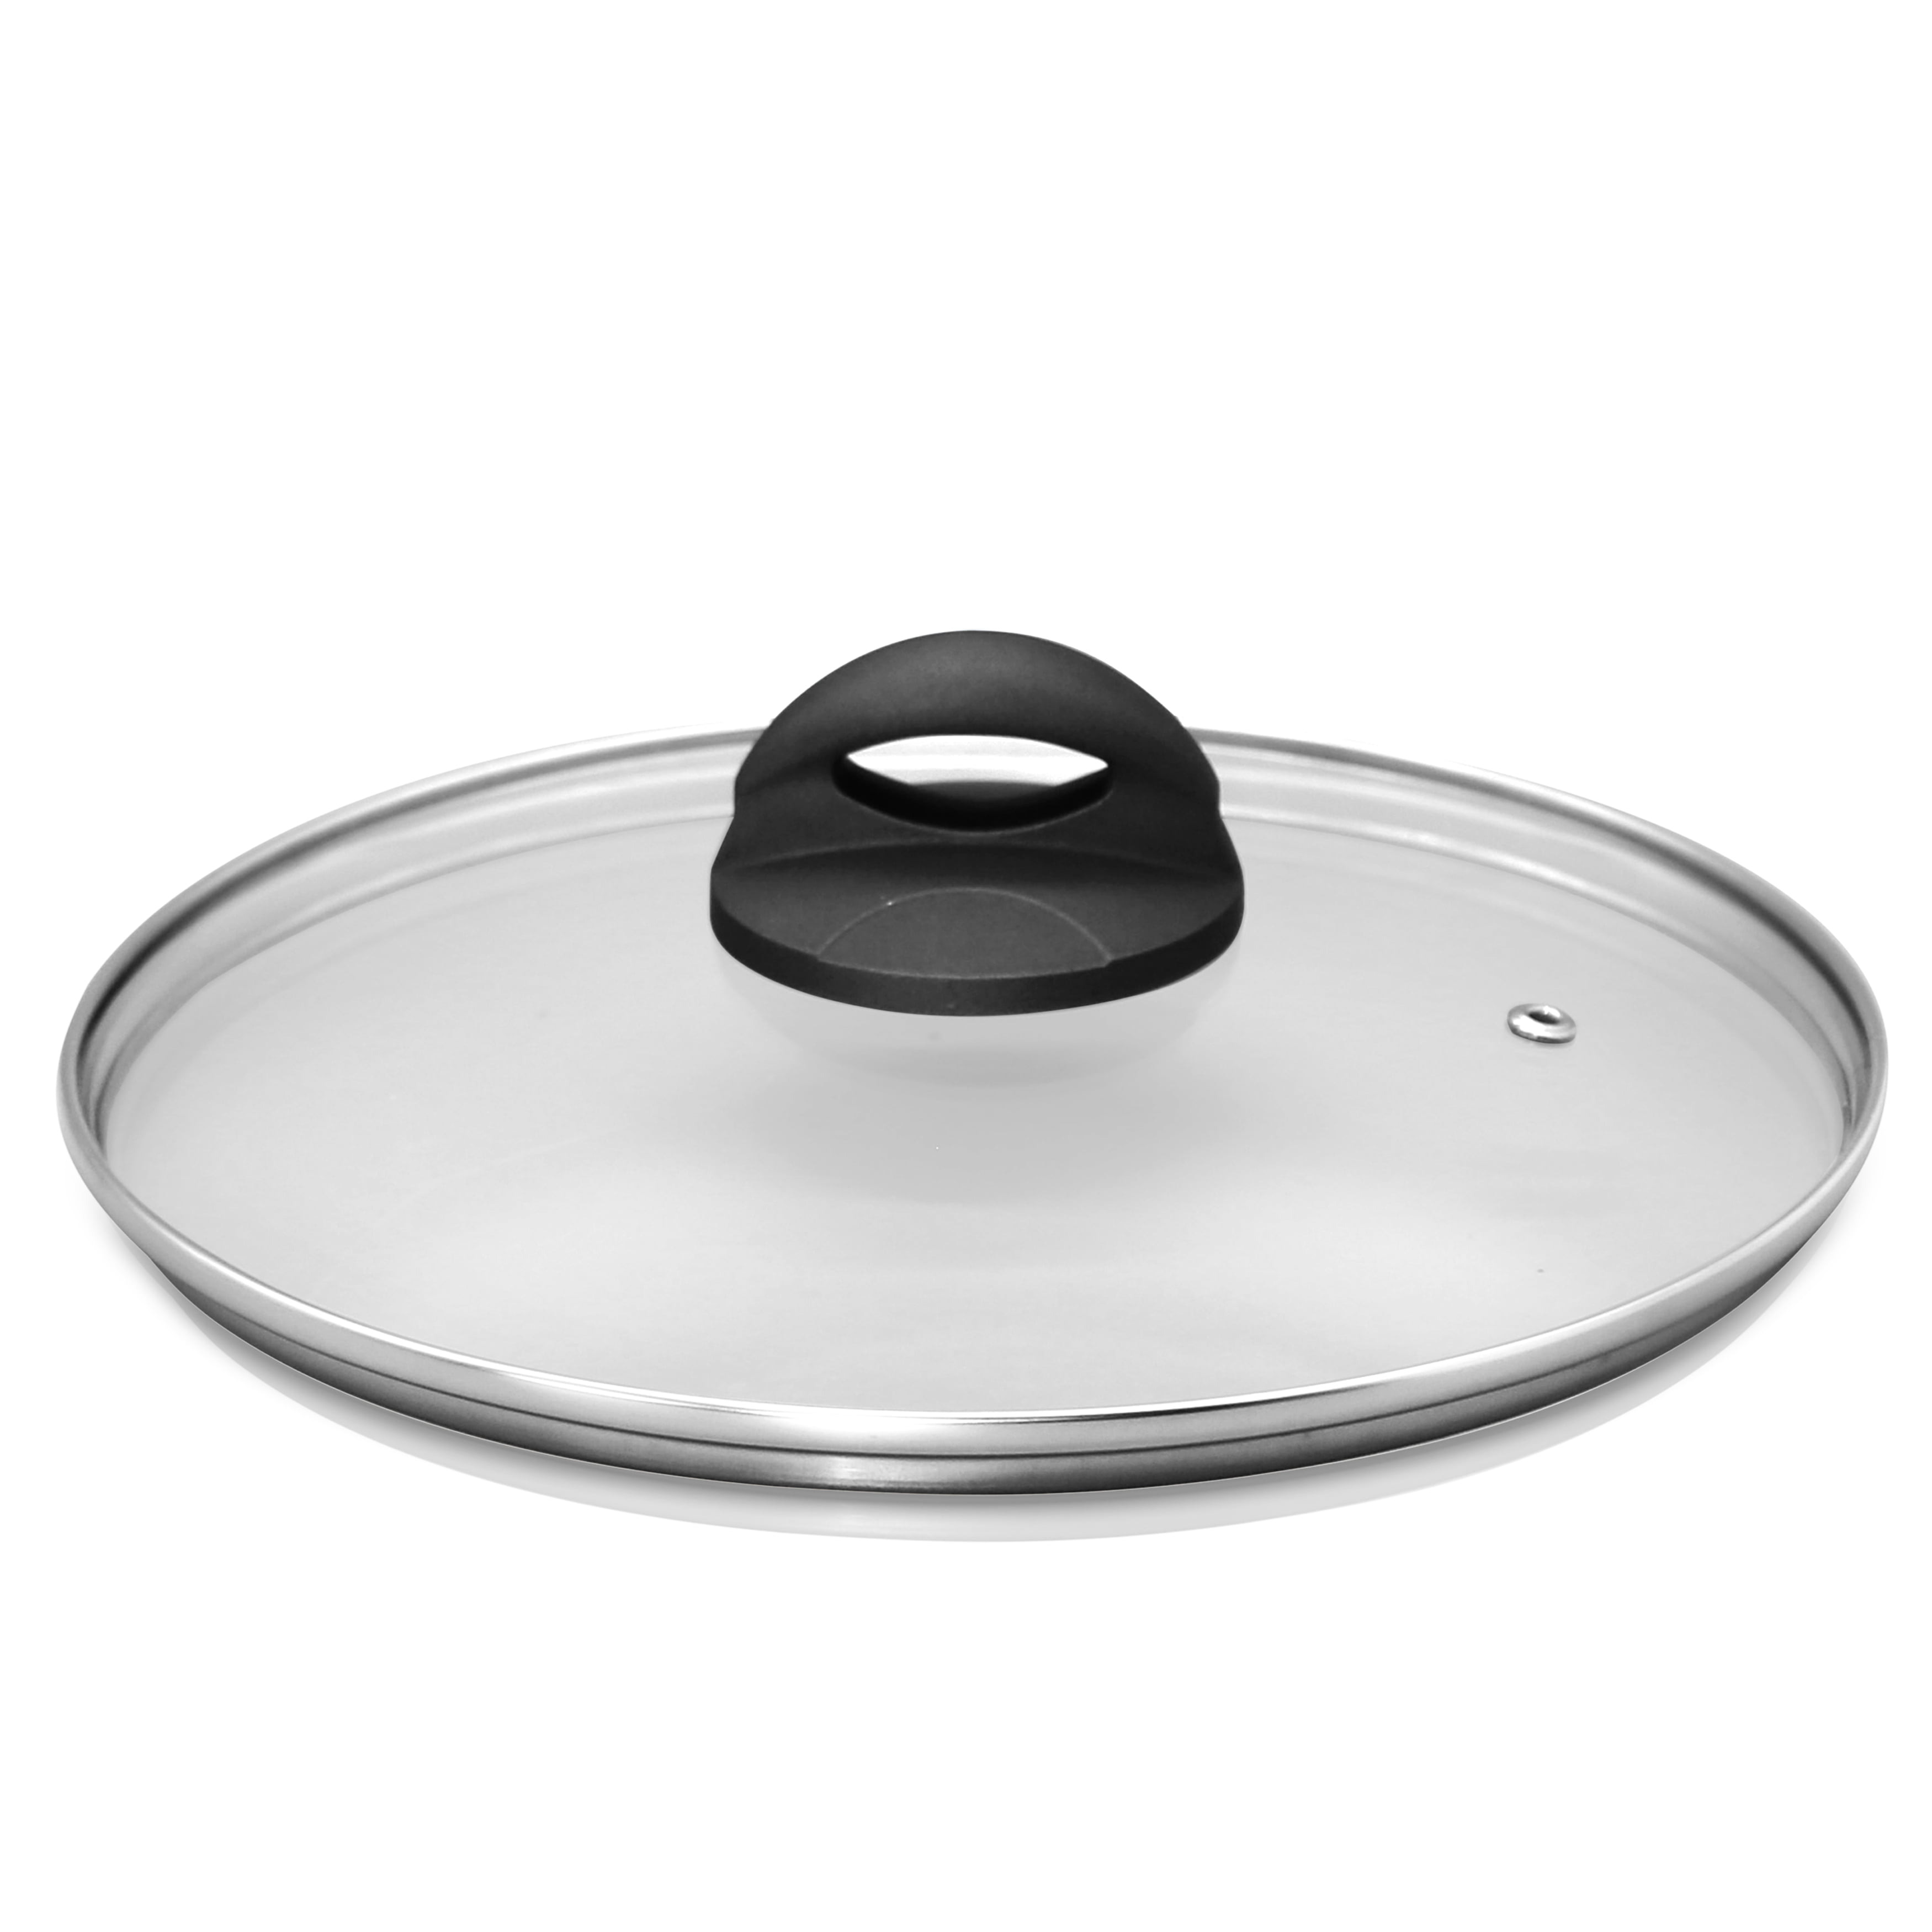 Lids Glass Tempered Glass Replacement Lid For Pans Pots /Casseroles Frying Pan 